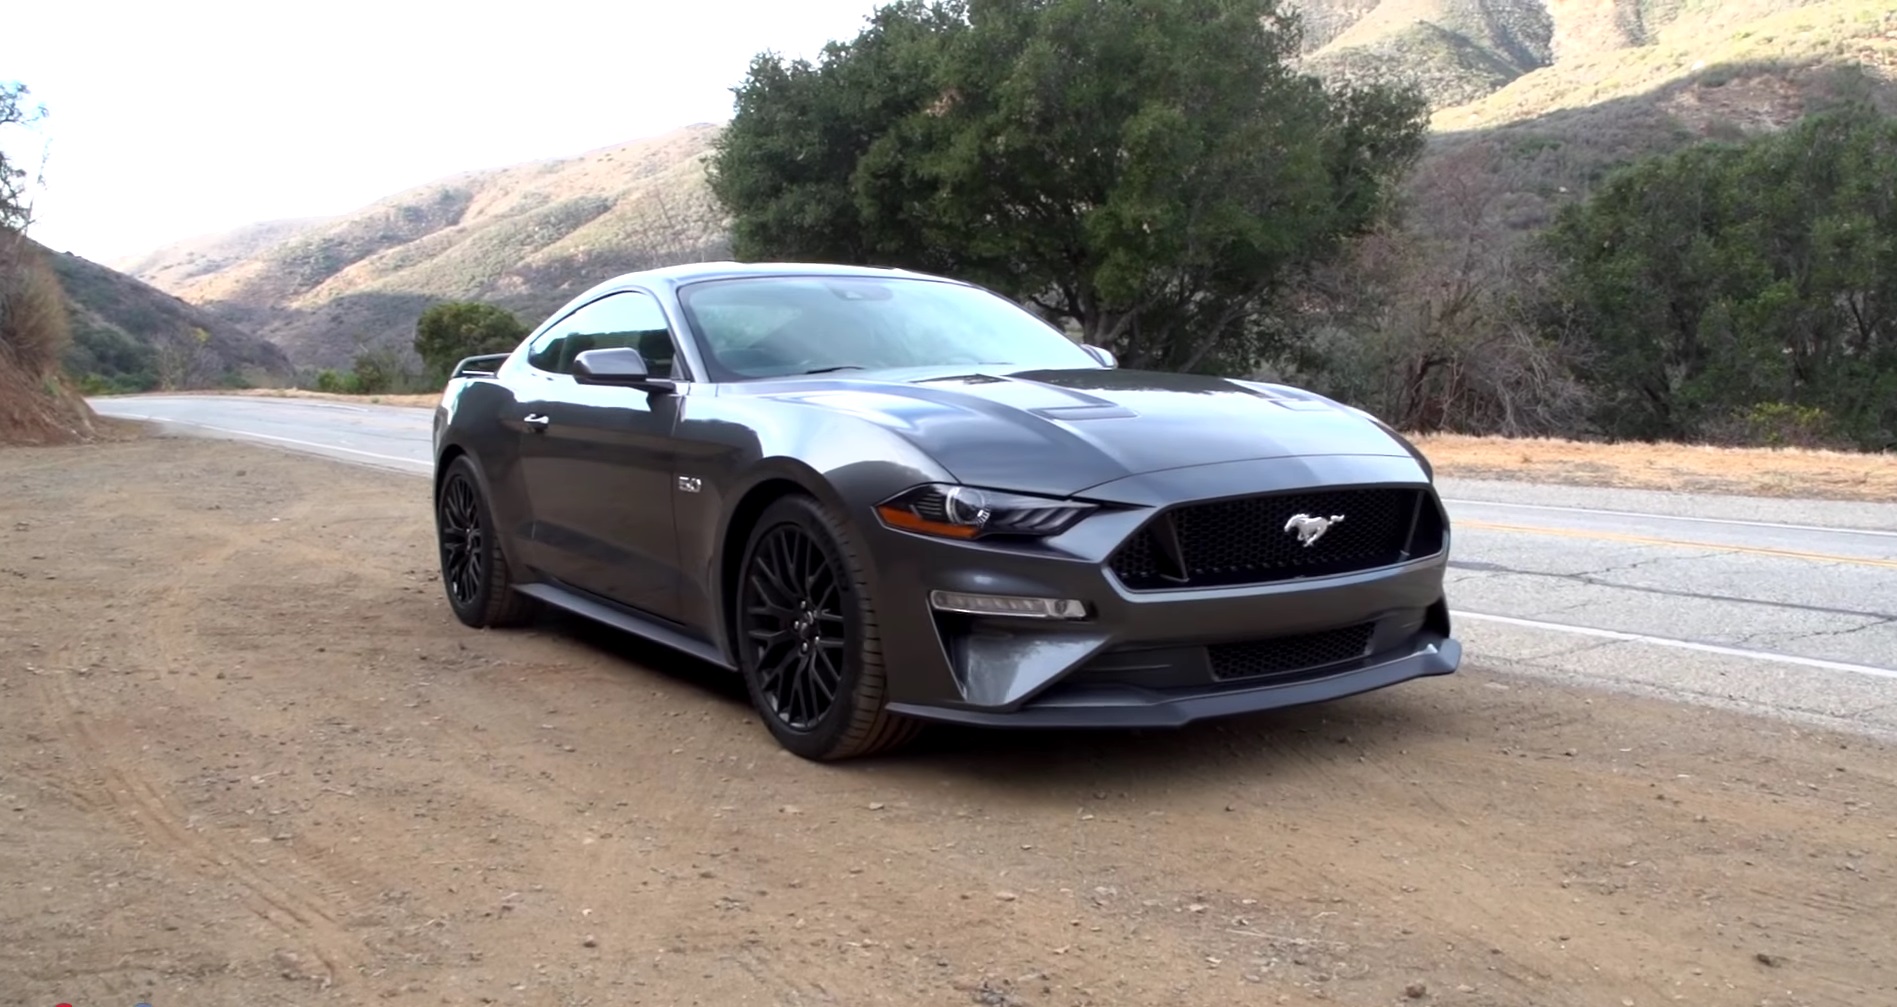 Video: 2018 Ford Mustang Test Drive Review